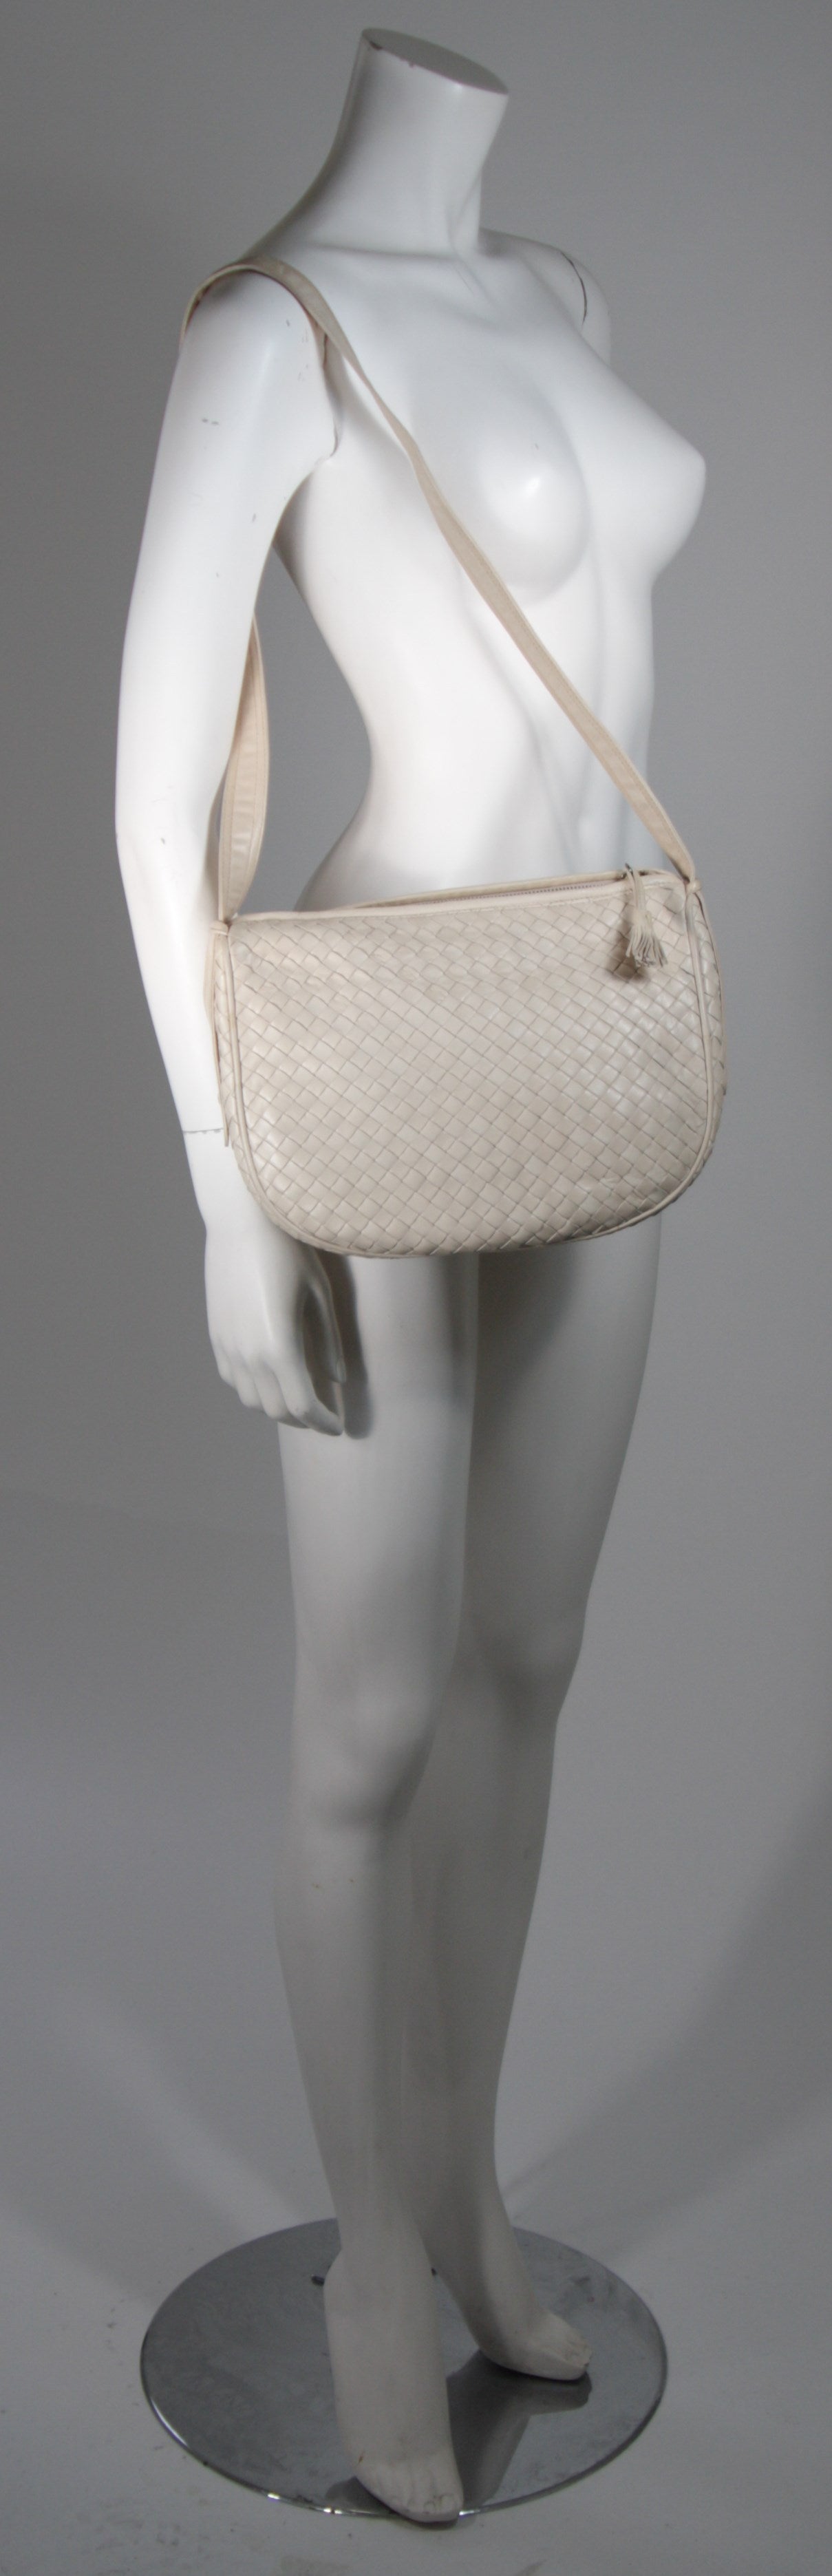 This vintage Bottega Veneta is available for viewing at our Beverly Hills Boutique. We offer a large selection of evening gowns and luxury garments.

This handbag is composed of a supple off white woven leather. The purse features a zipper closure